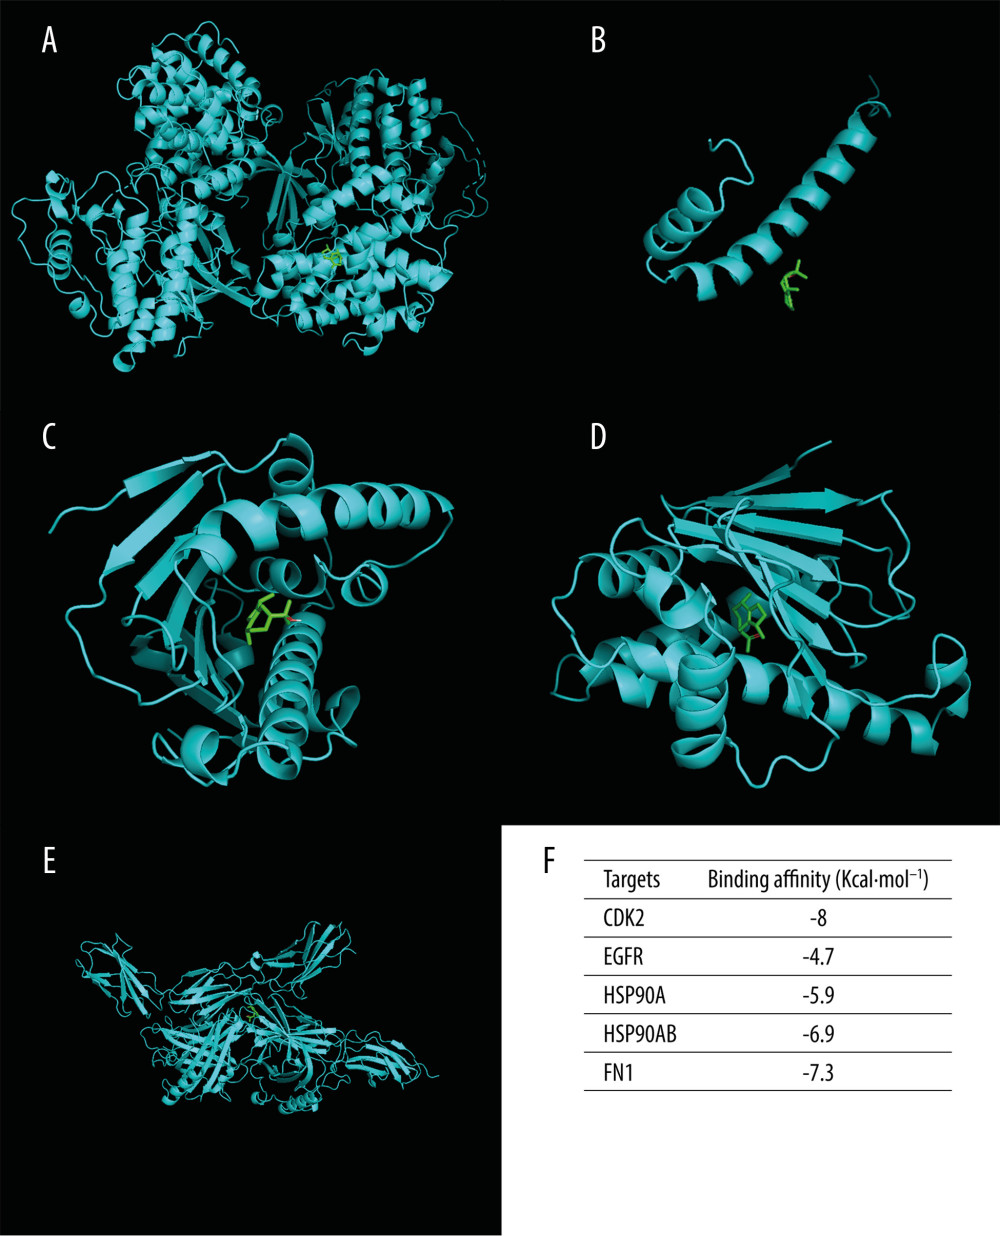 Molecular docking diagrams of (−)-Guaiol with (A) CDK2, (B) EGFR, (C) HSP90AA1, (D) HSP90AB1, and (E) FN1. (F) The binding affinity for the 5 targets docked into the (−)-Guaiol crystal structure.